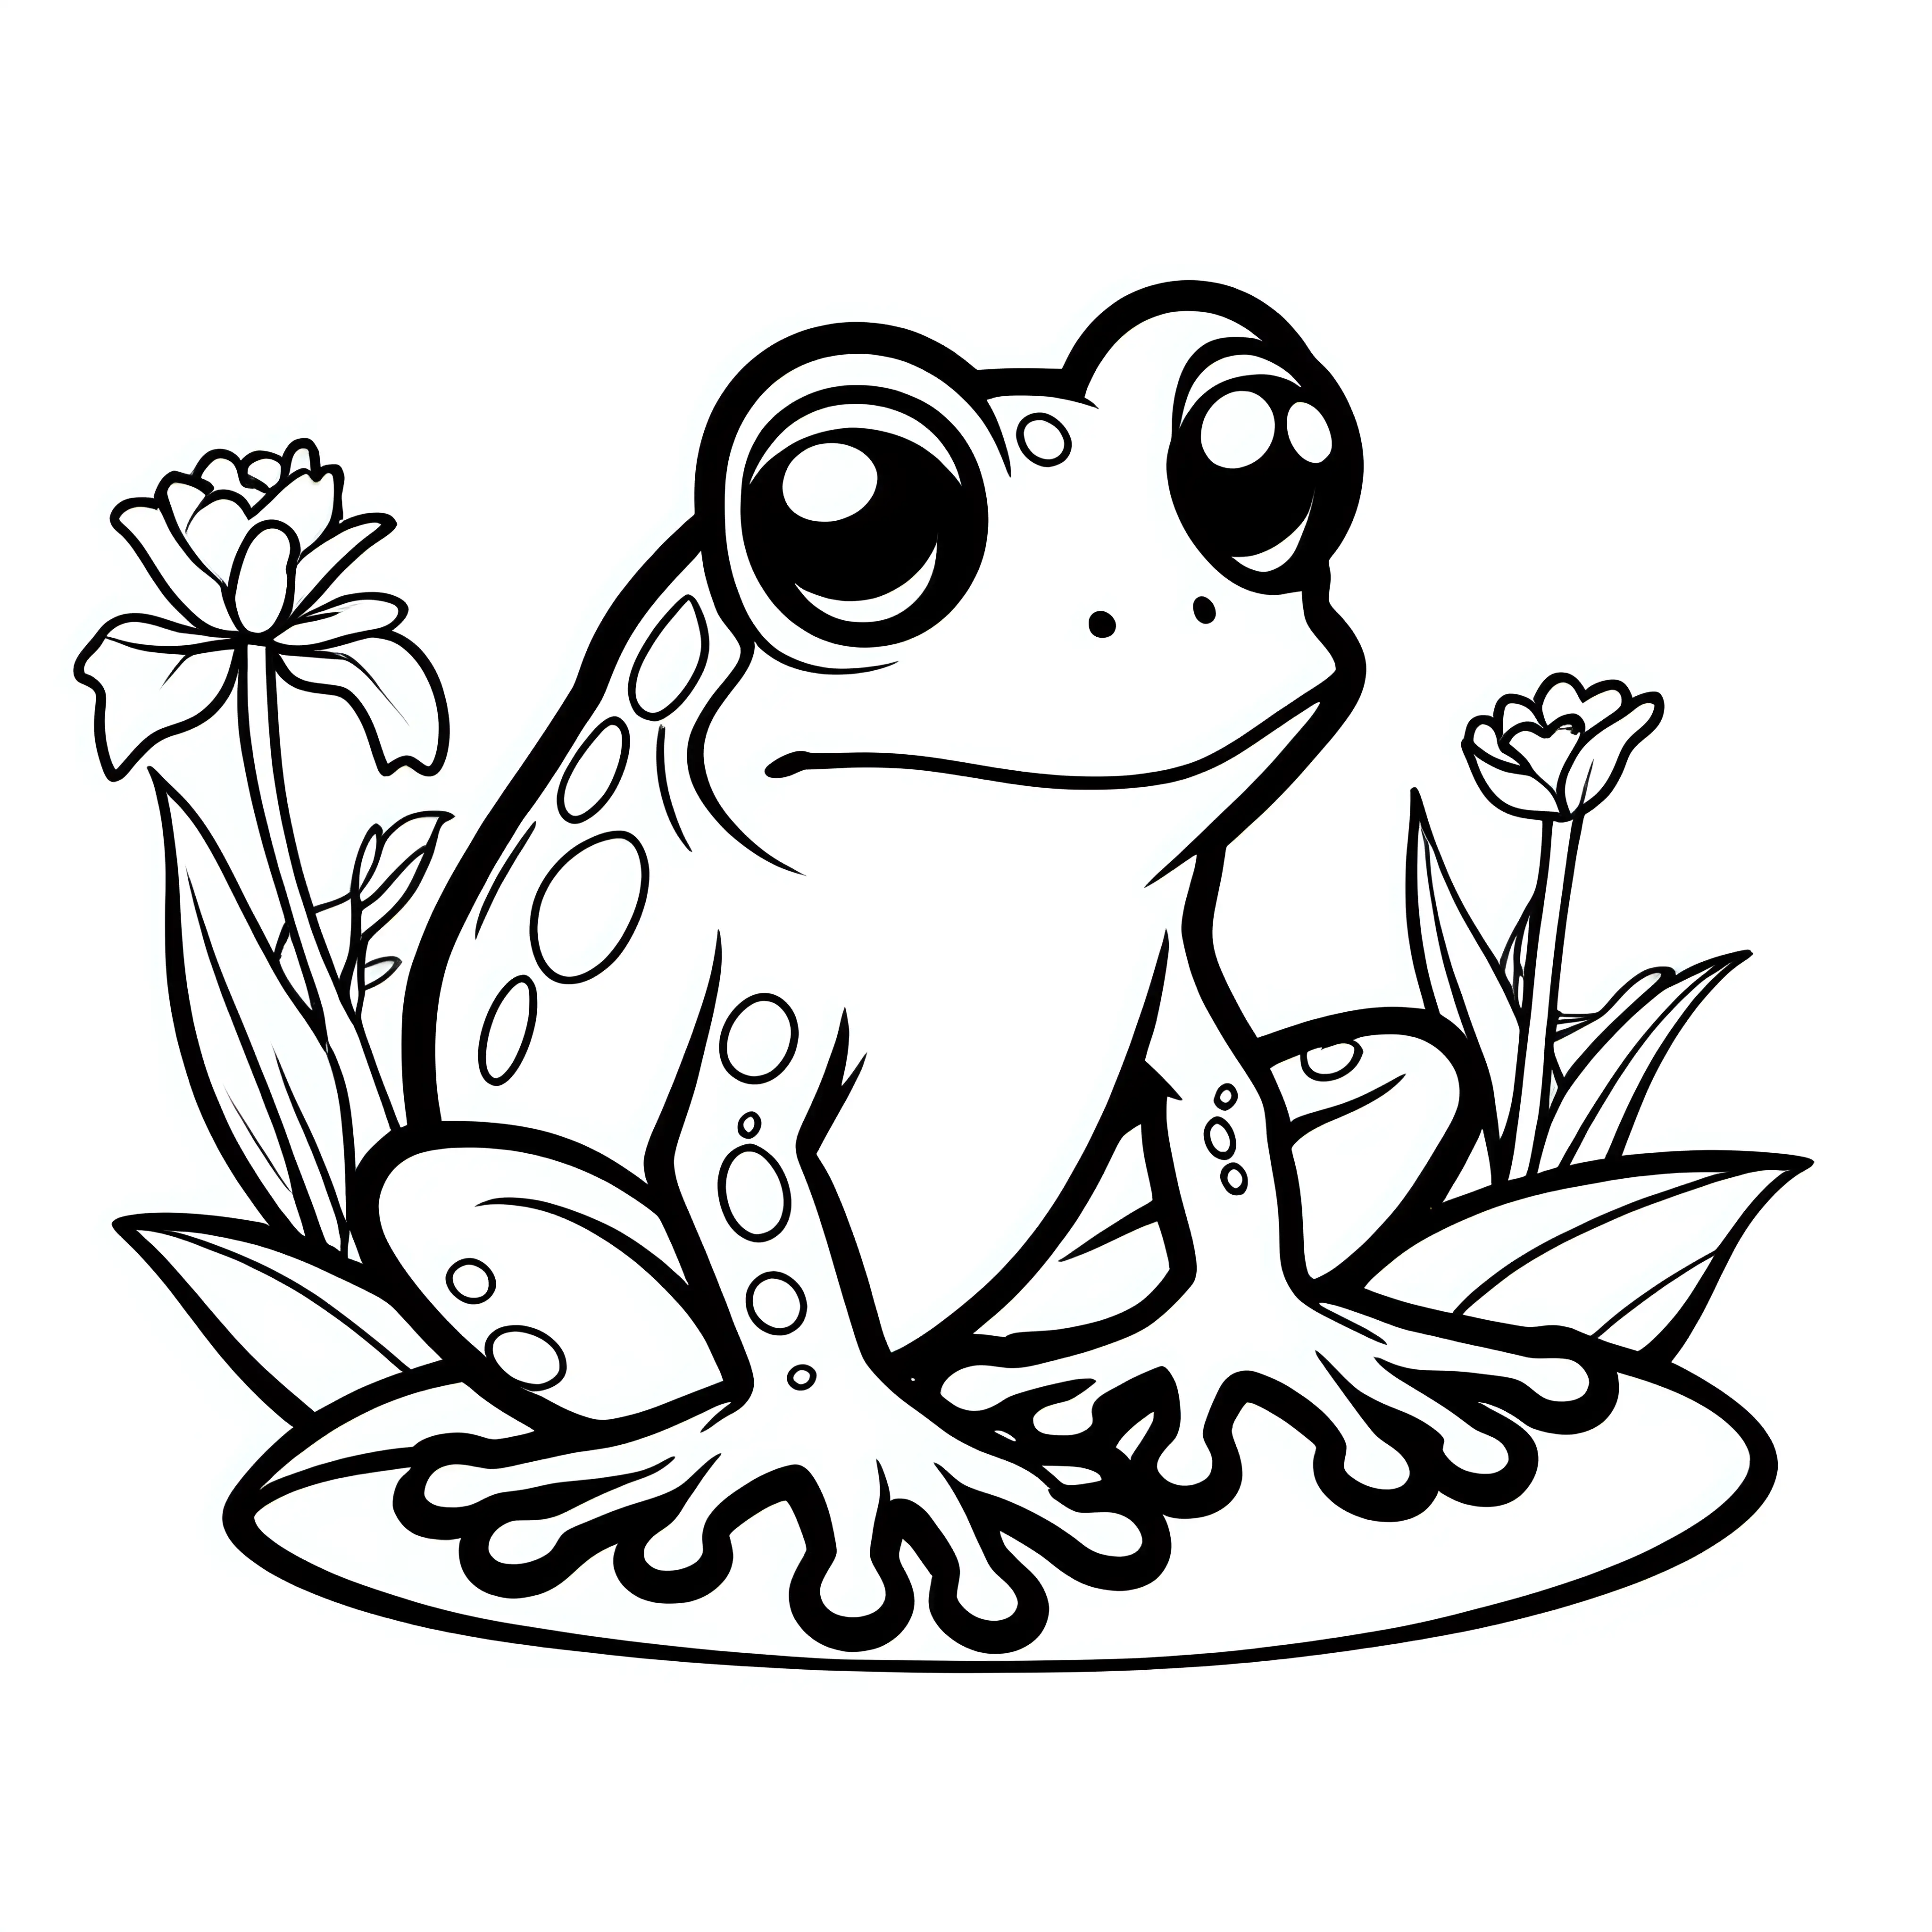 Cute Frog Clipart Transparent Background, Cute Frog Doodle Style Free Png  Psd, Frog Drawing, Cute Frog Drawing, Cute Animal PNG Image For Free  Download